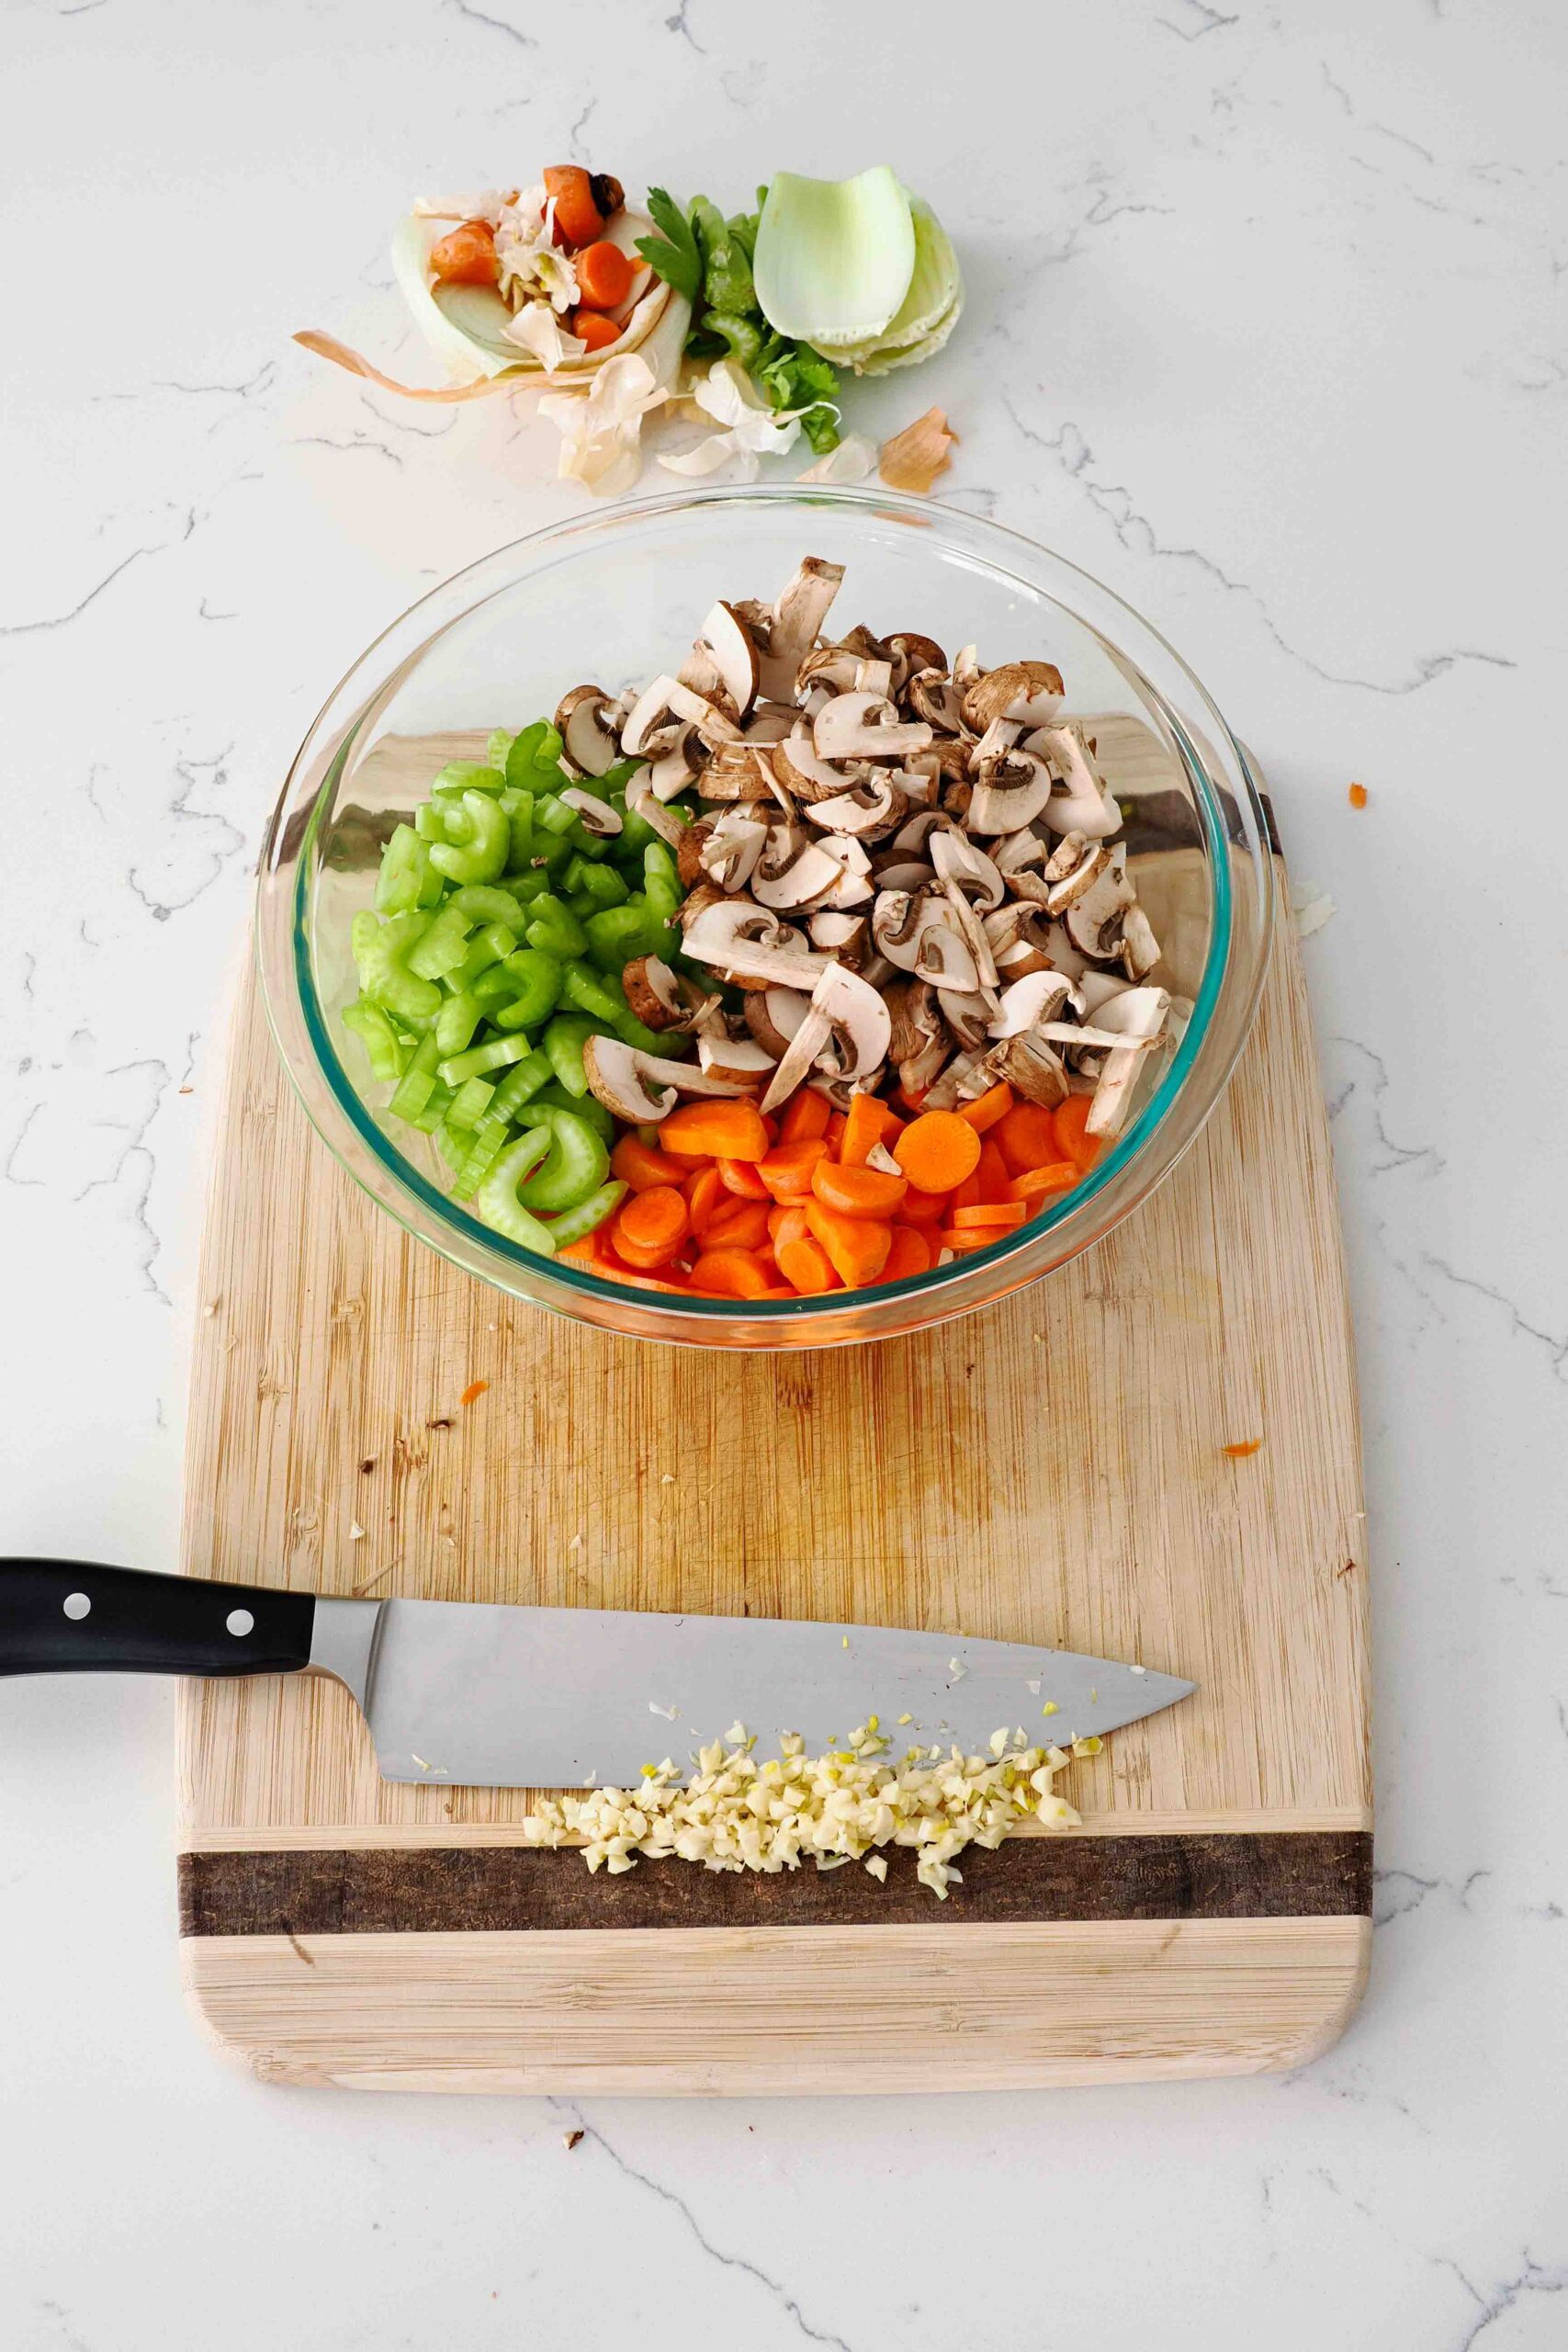 Chopped onion, celery, carrot, and mushrooms in a glass bowl, with minced garlic on a cutting board.